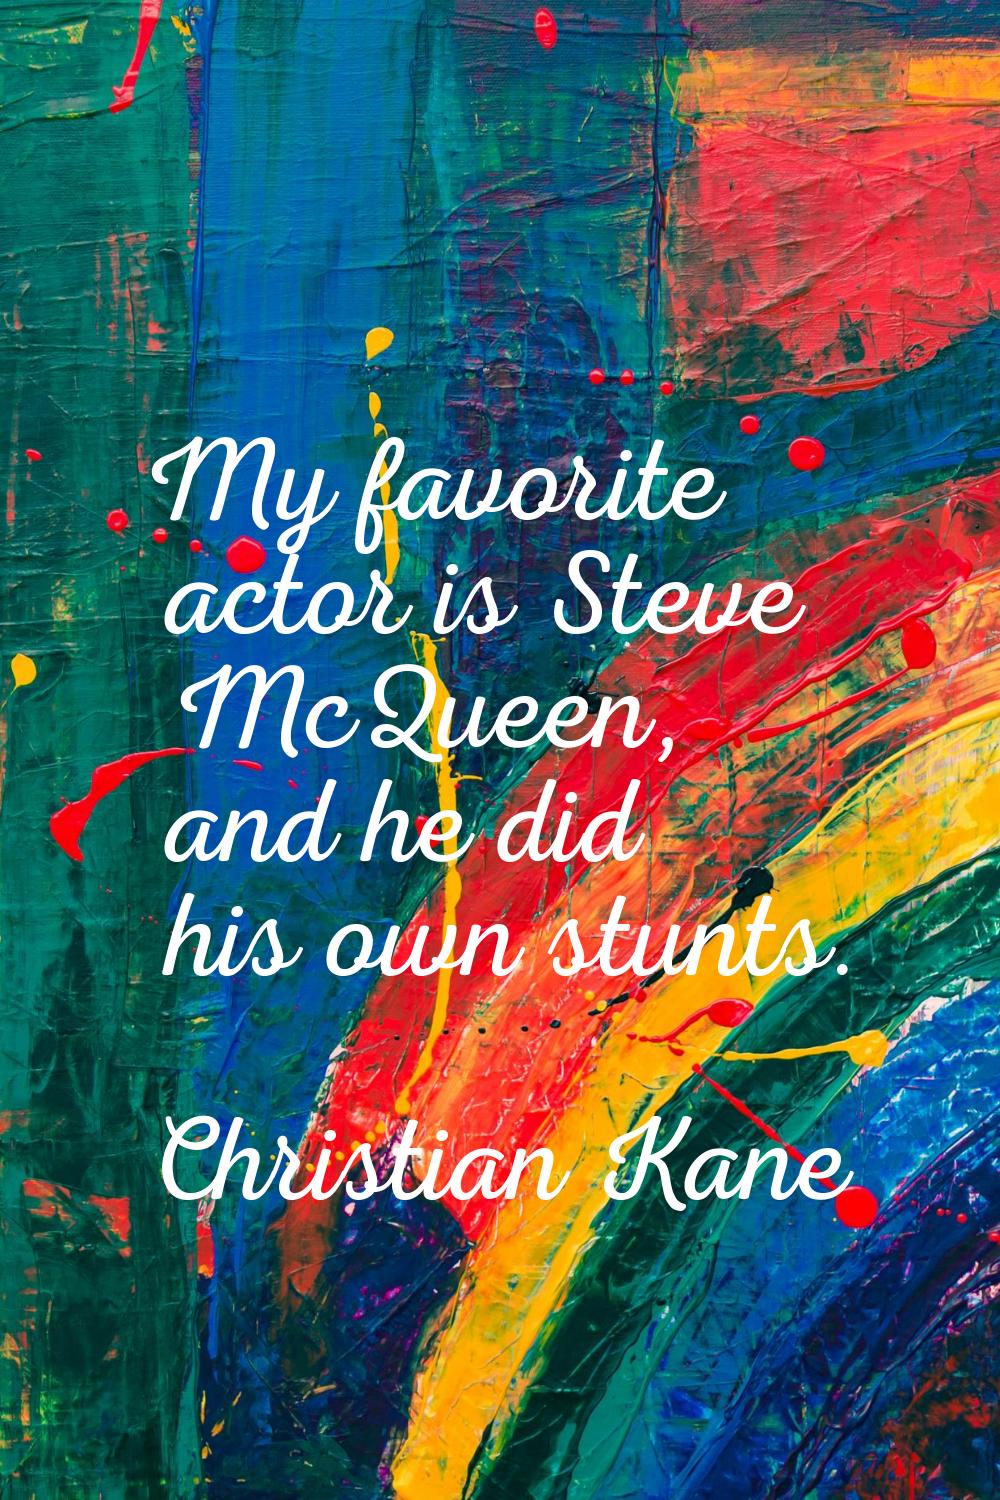 My favorite actor is Steve McQueen, and he did his own stunts.